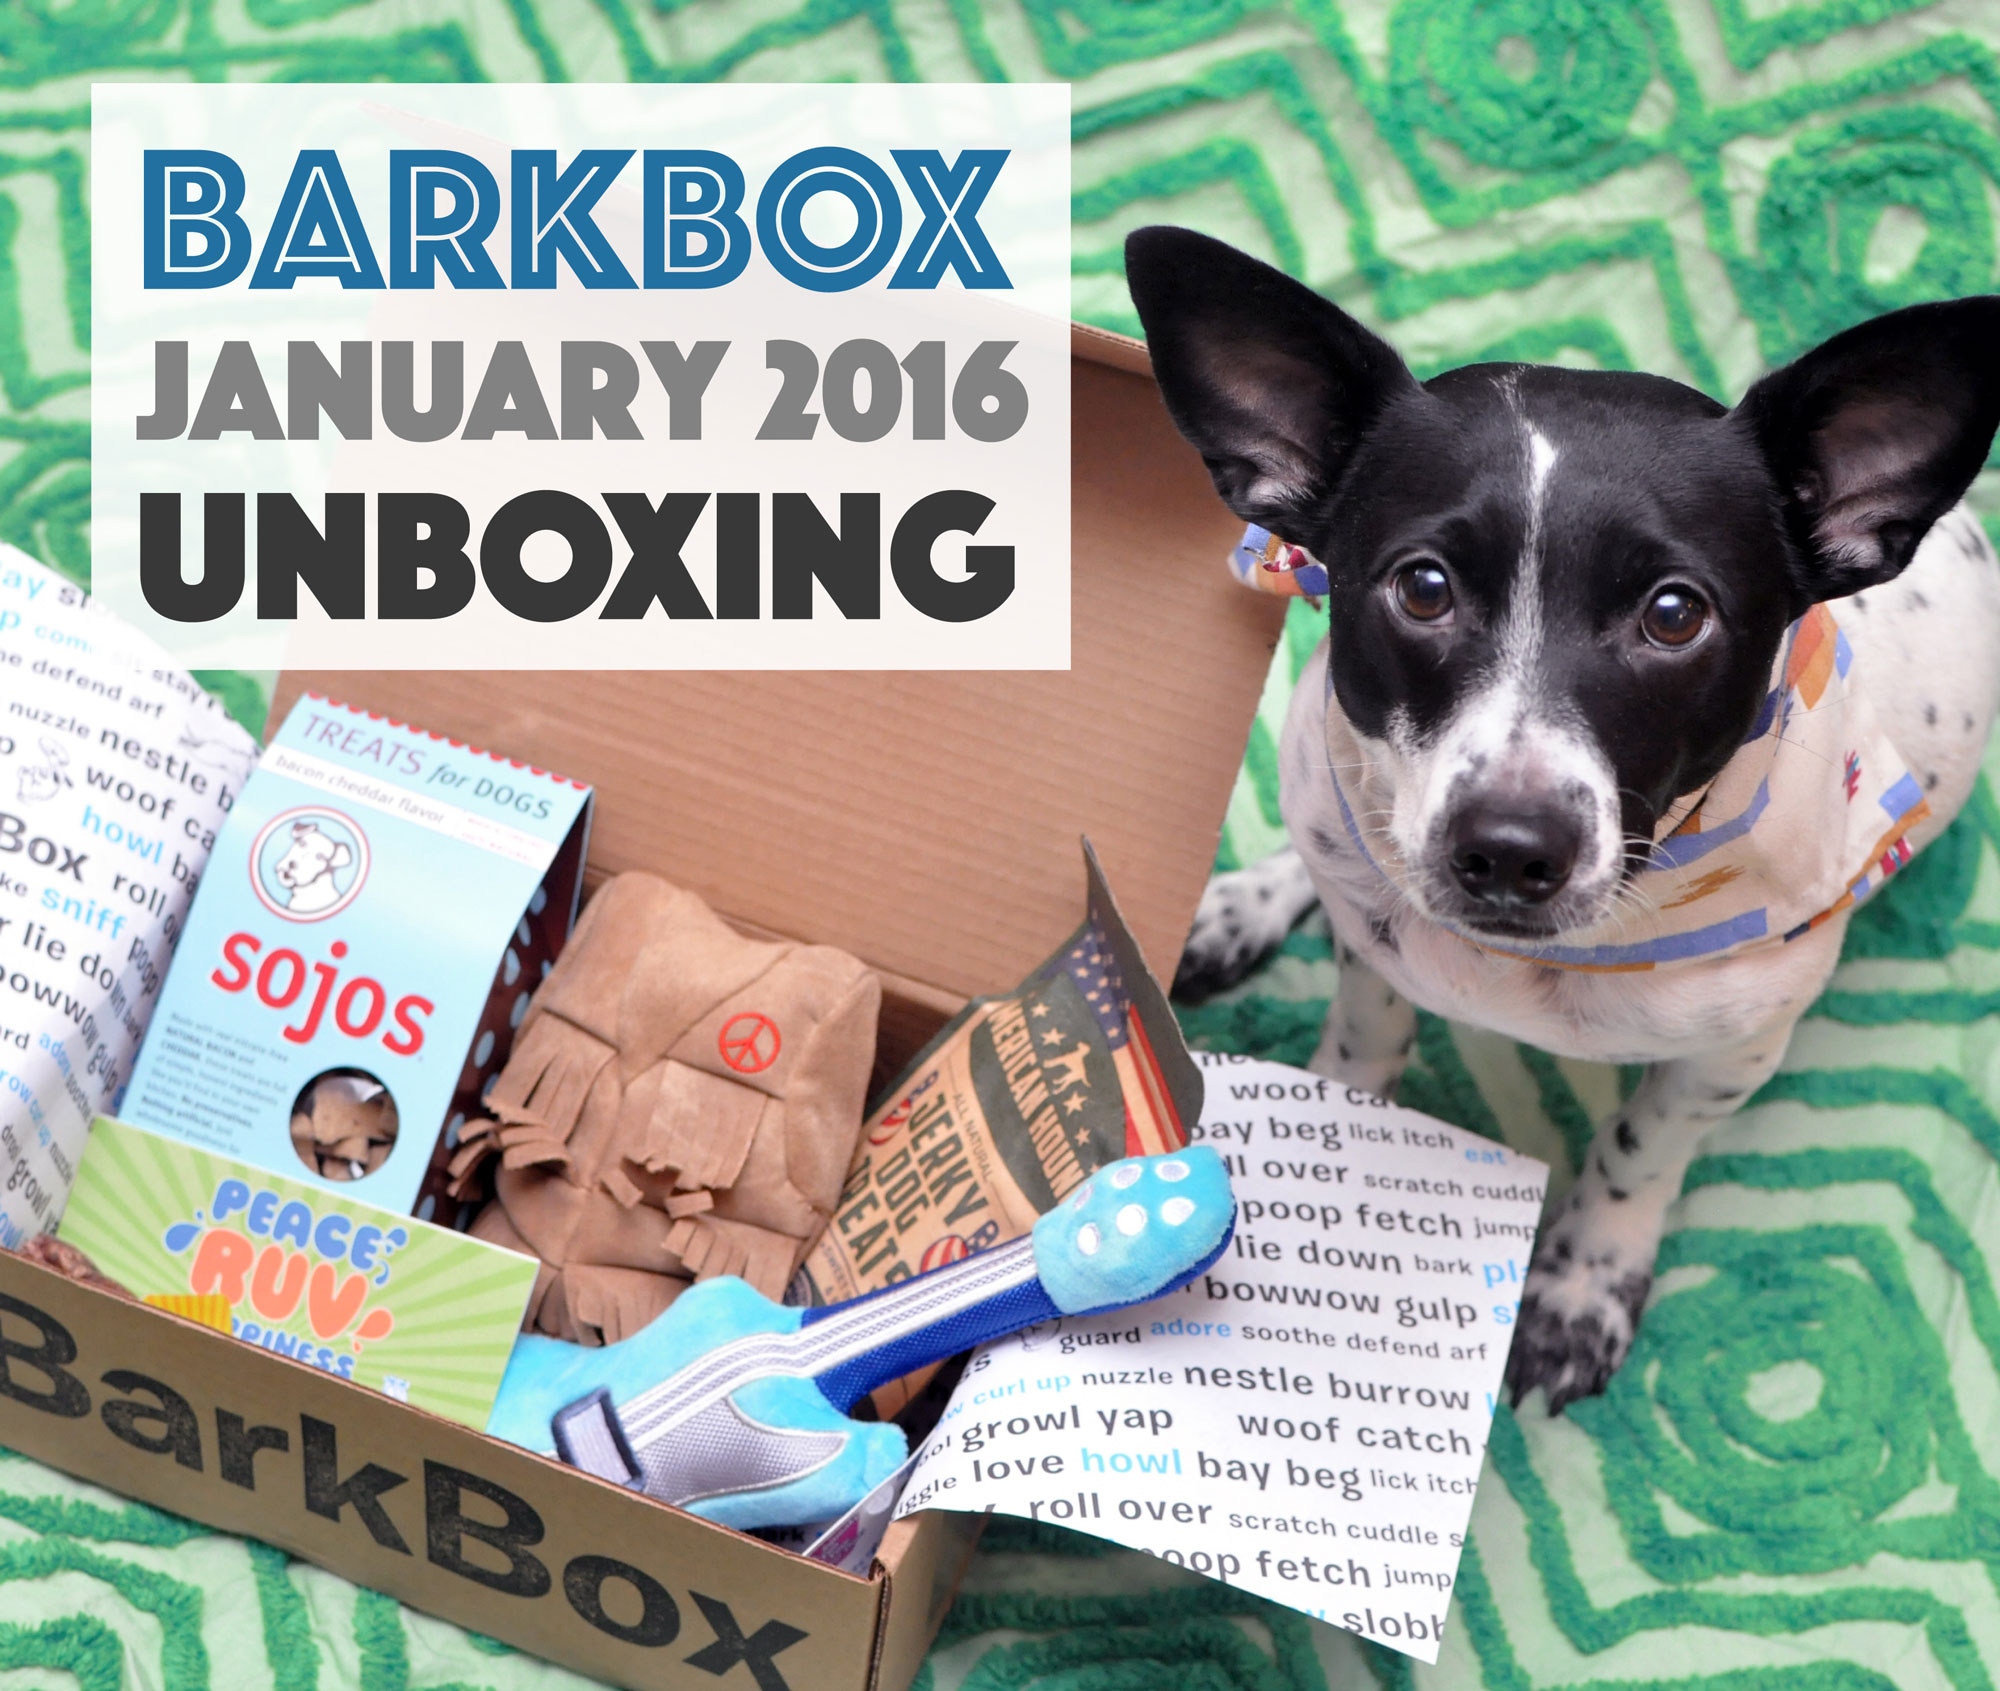 The Broke Dog: January 2016 BarkBox Unboxing. Add a free BarkBox to any new plan with code HENRYTHENUGGET!